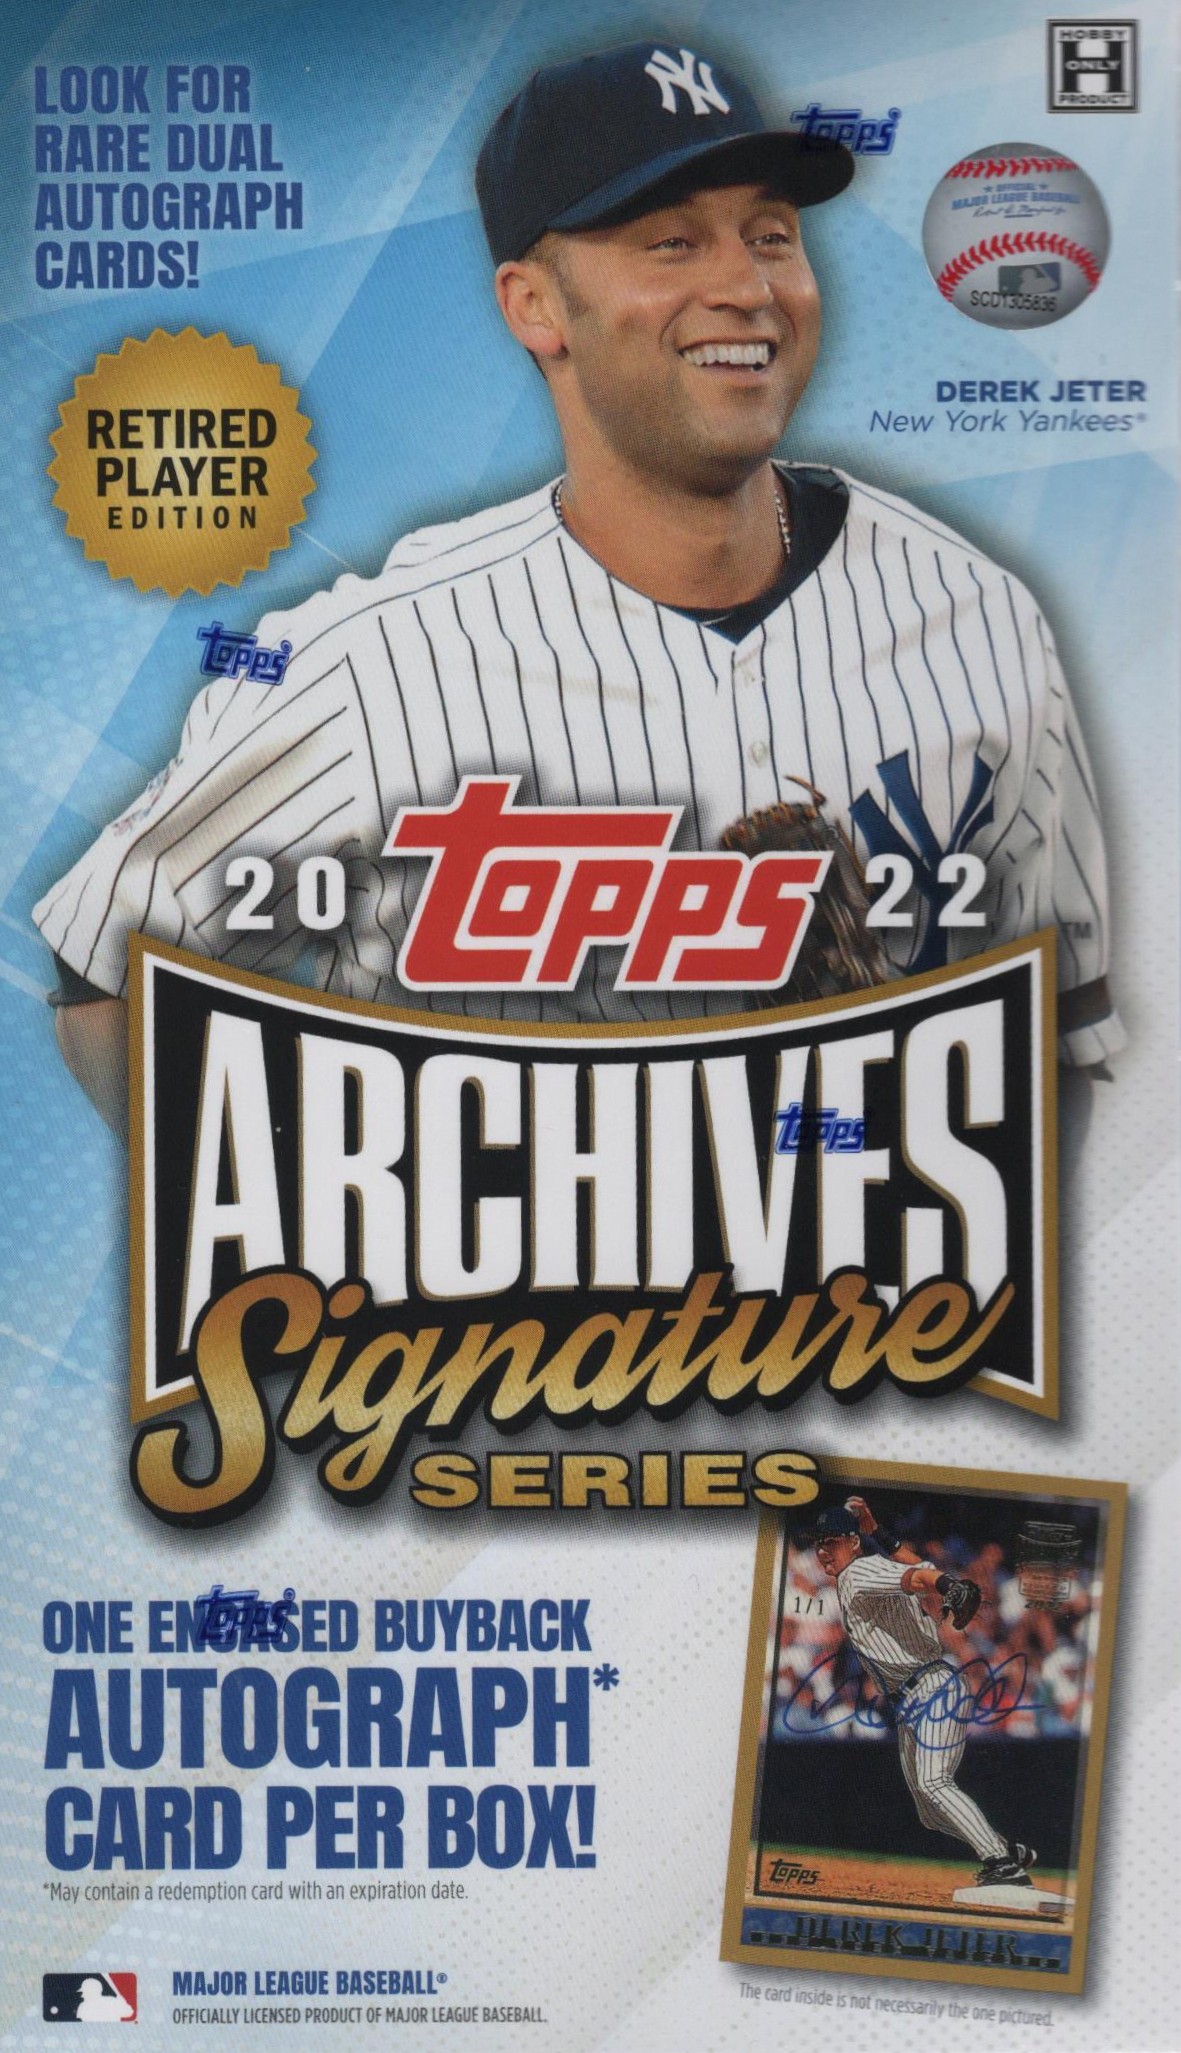 ⚾ TOPPS MLB 2022 ARCHIVES SIGNATURE SERIES – RETIRED【製品情報 